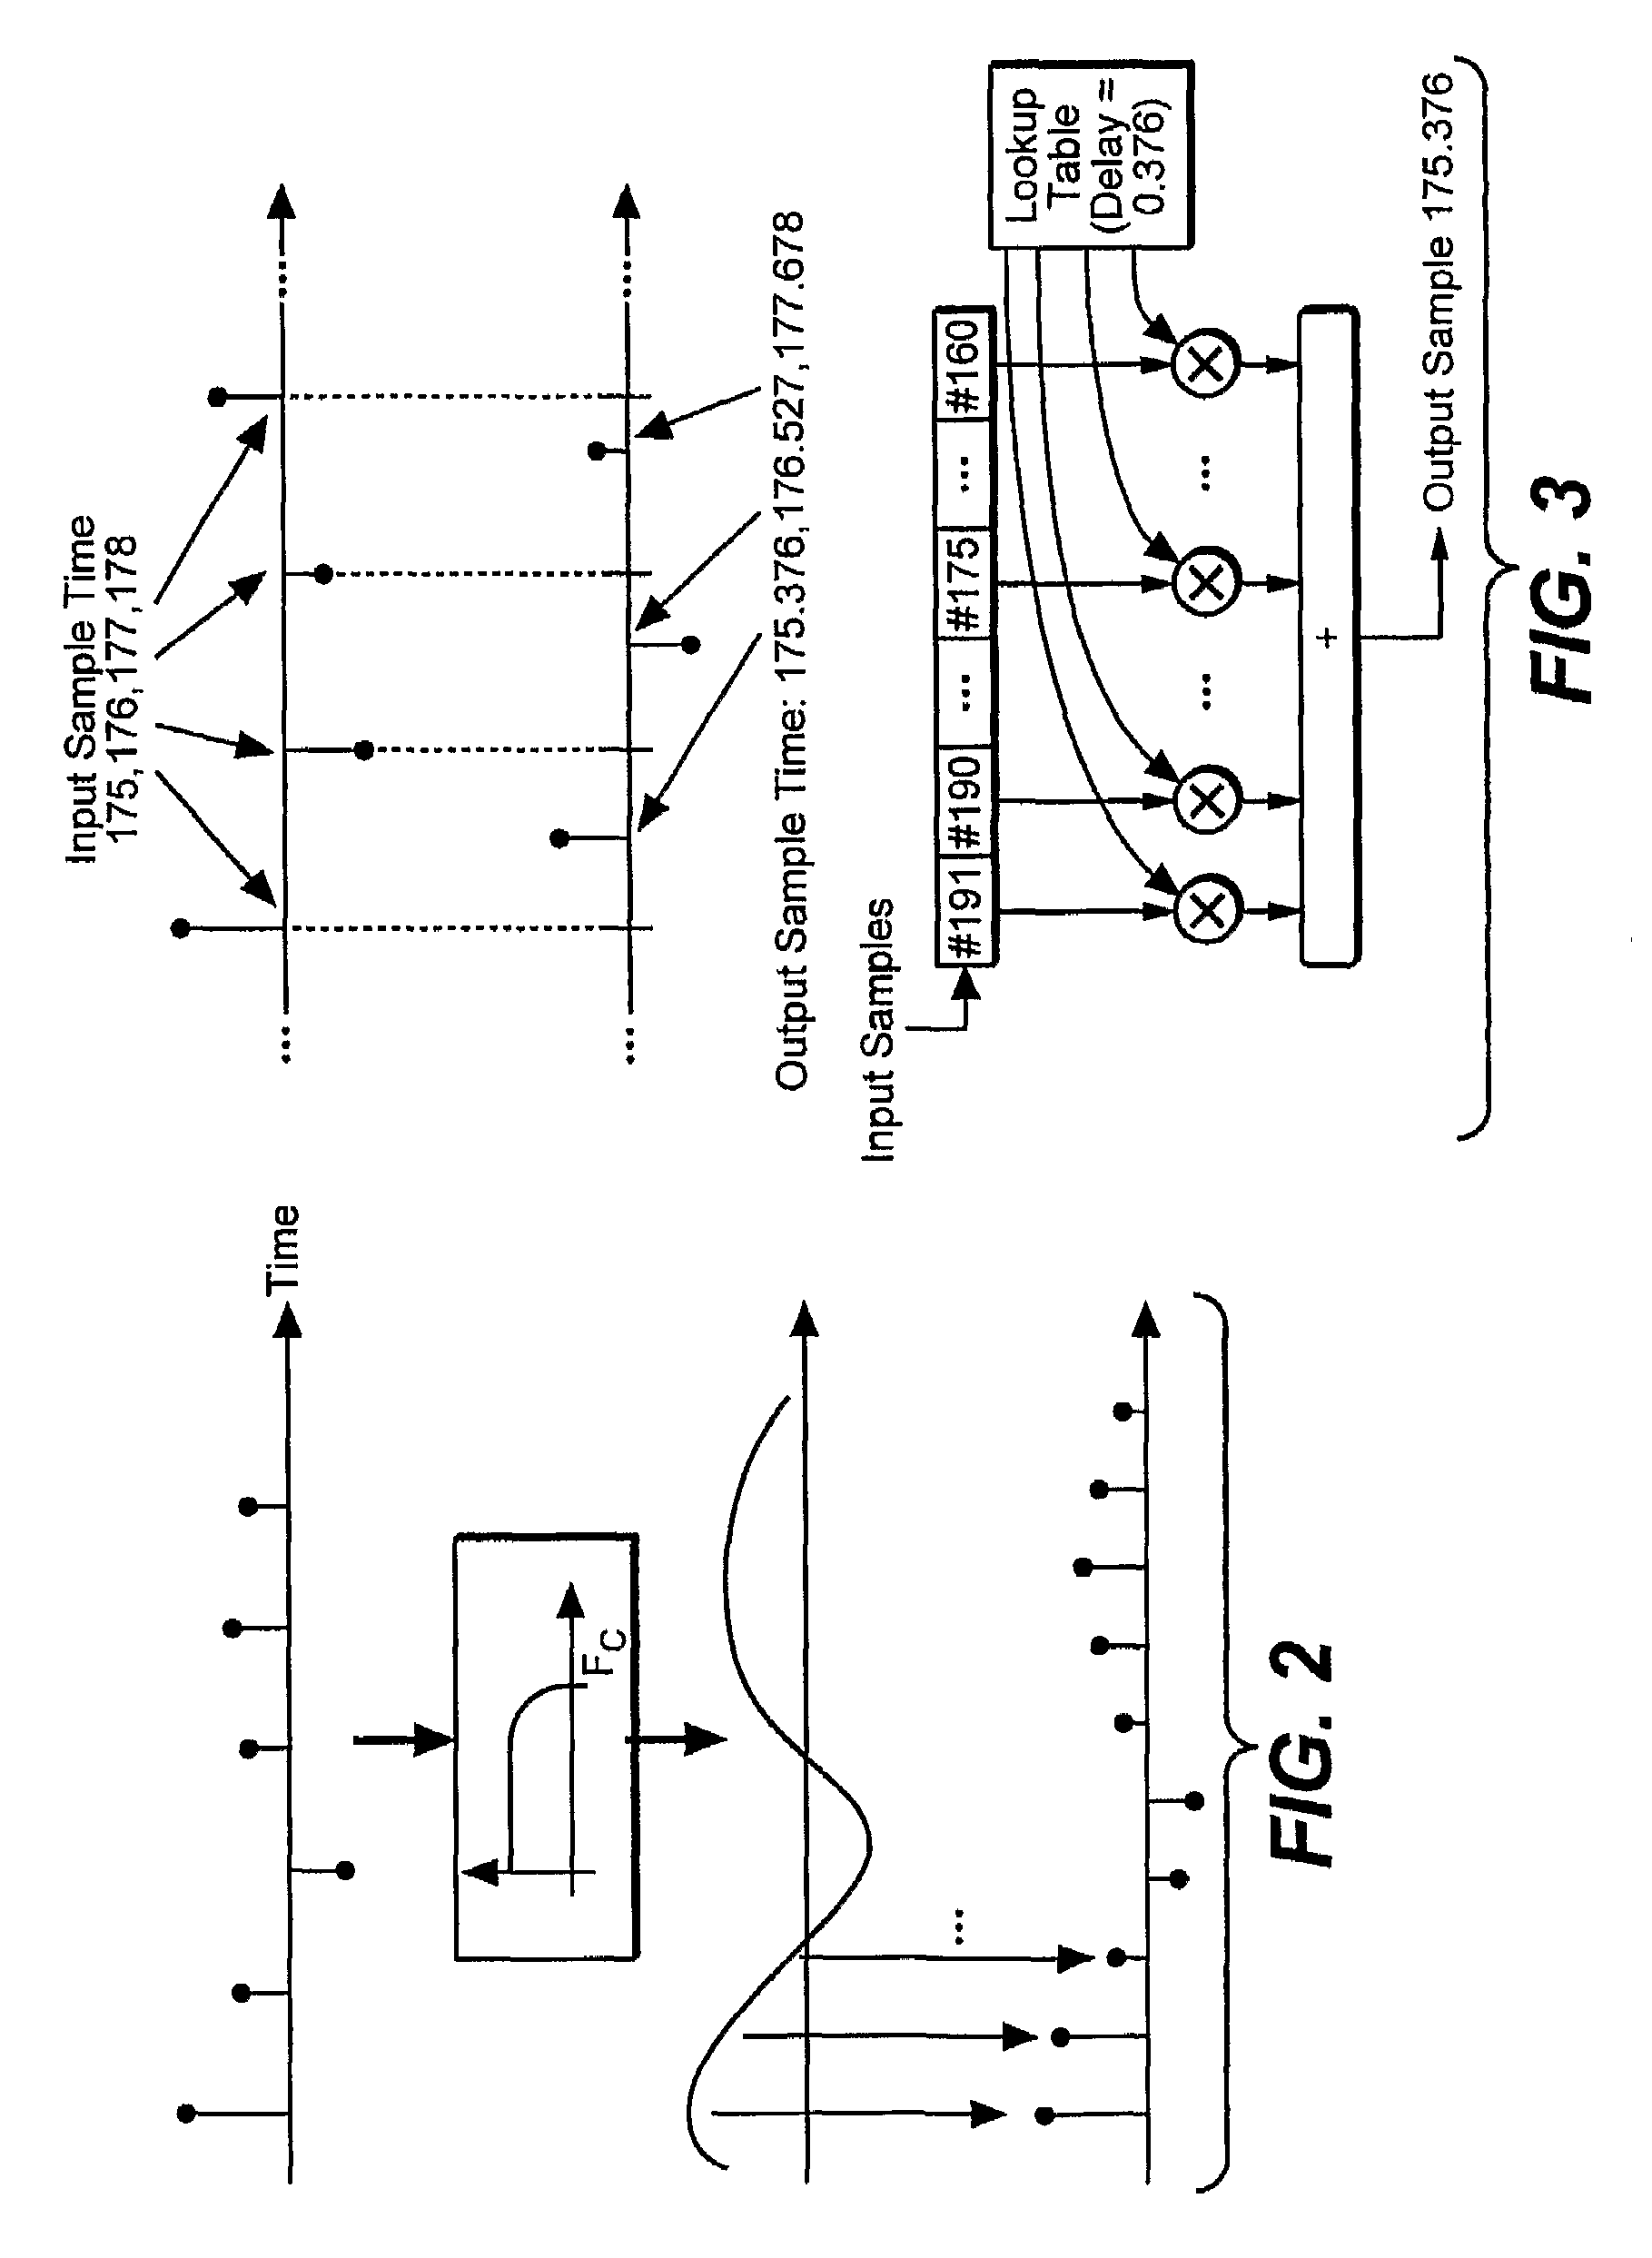 Asynchronous sample rate conversion using a digital simulation of an analog filter